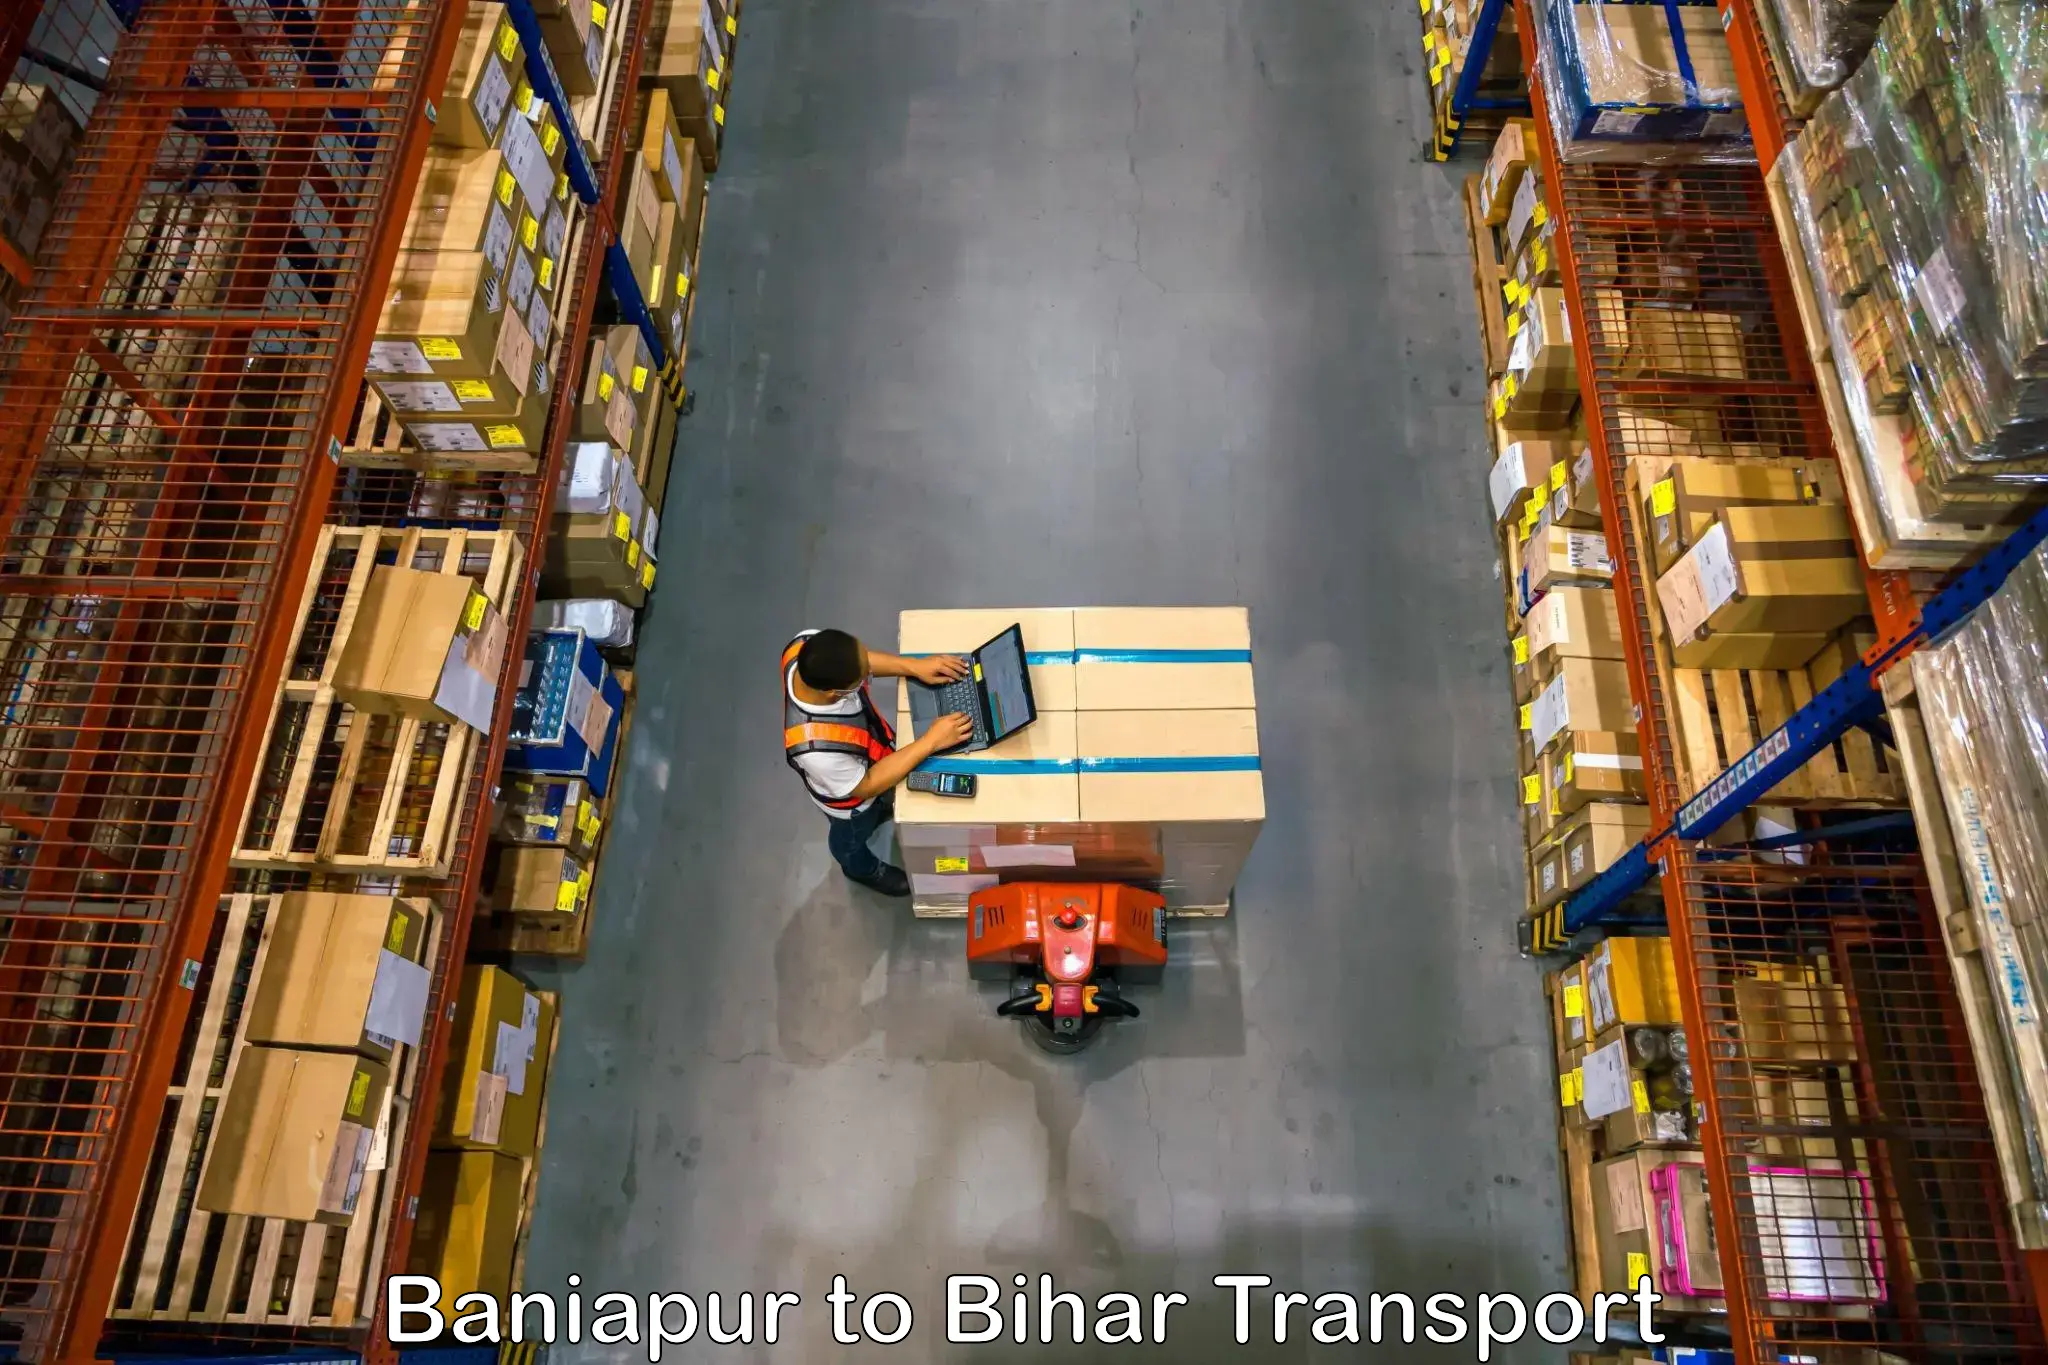 Truck transport companies in India Baniapur to Fatwah